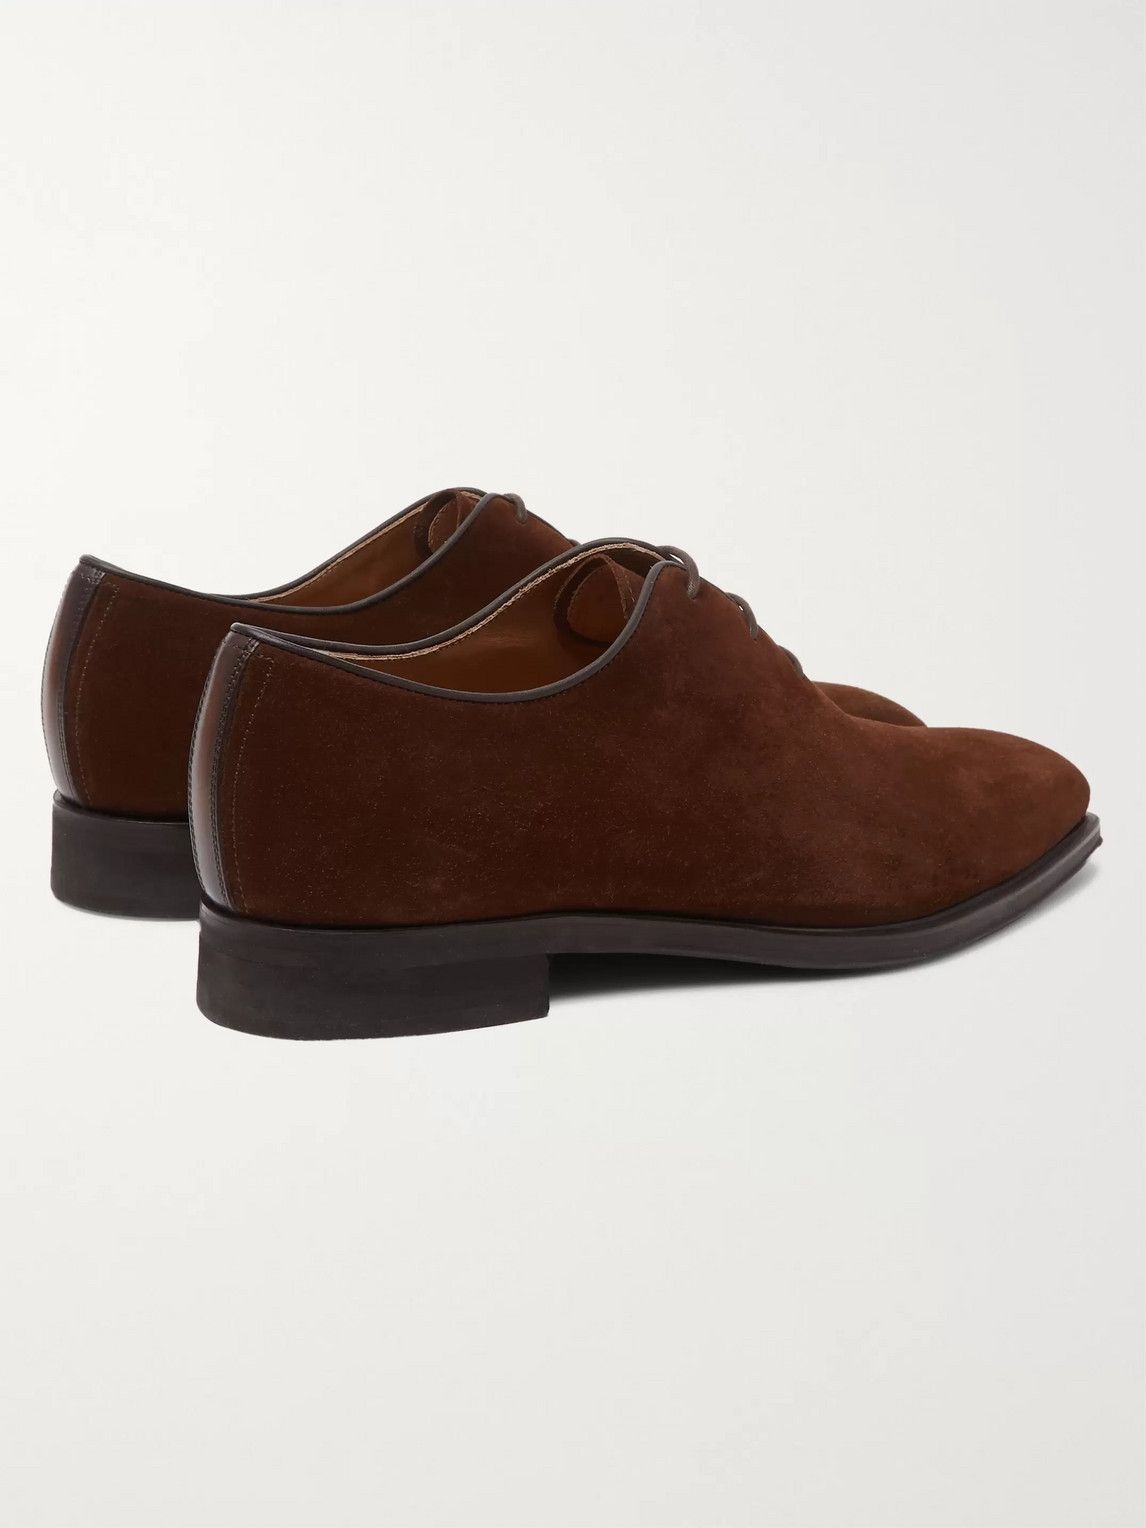 Berluti - Alessandro Infini Leather-Trimmed Suede Oxford Shoes